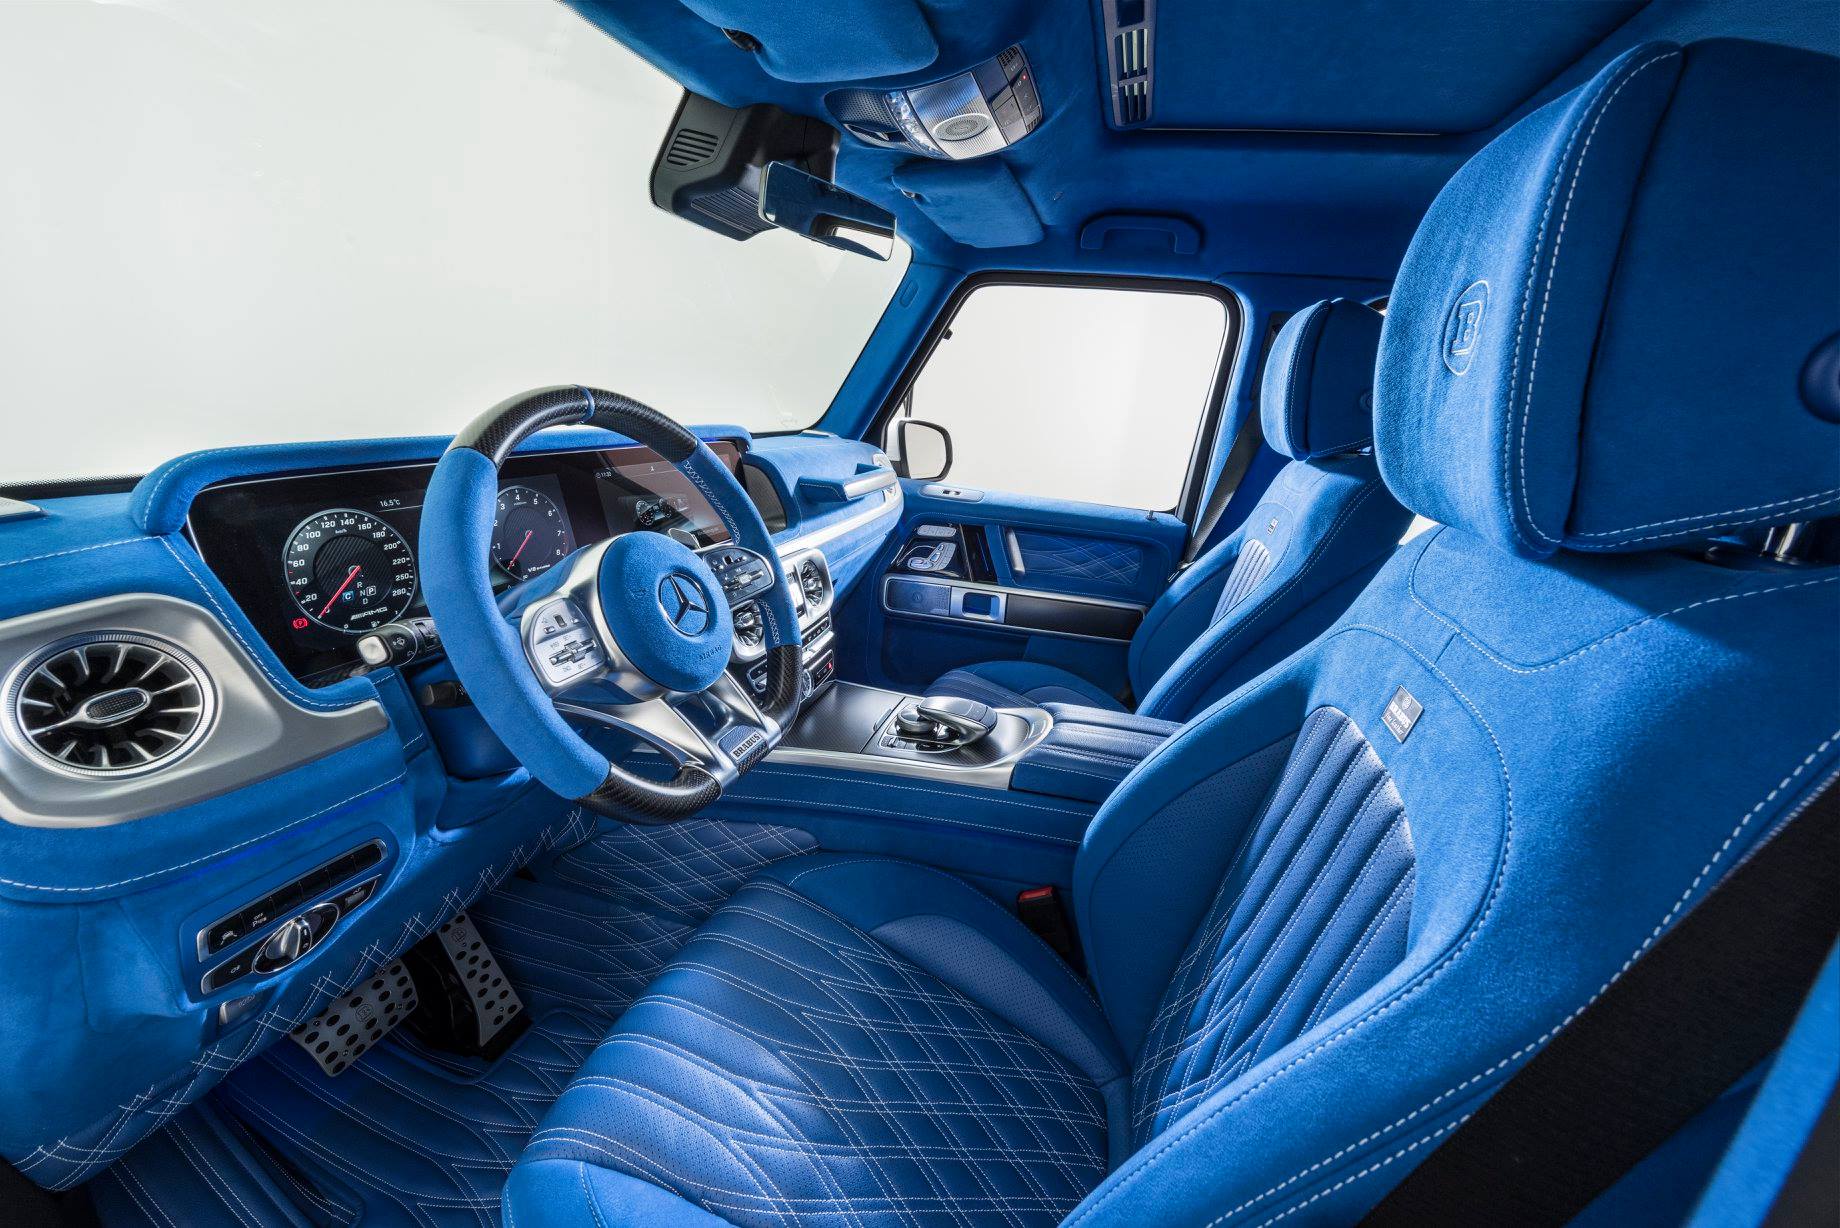 Brabus Upgrades the Interior of the 2019 Mercedes AMG G63